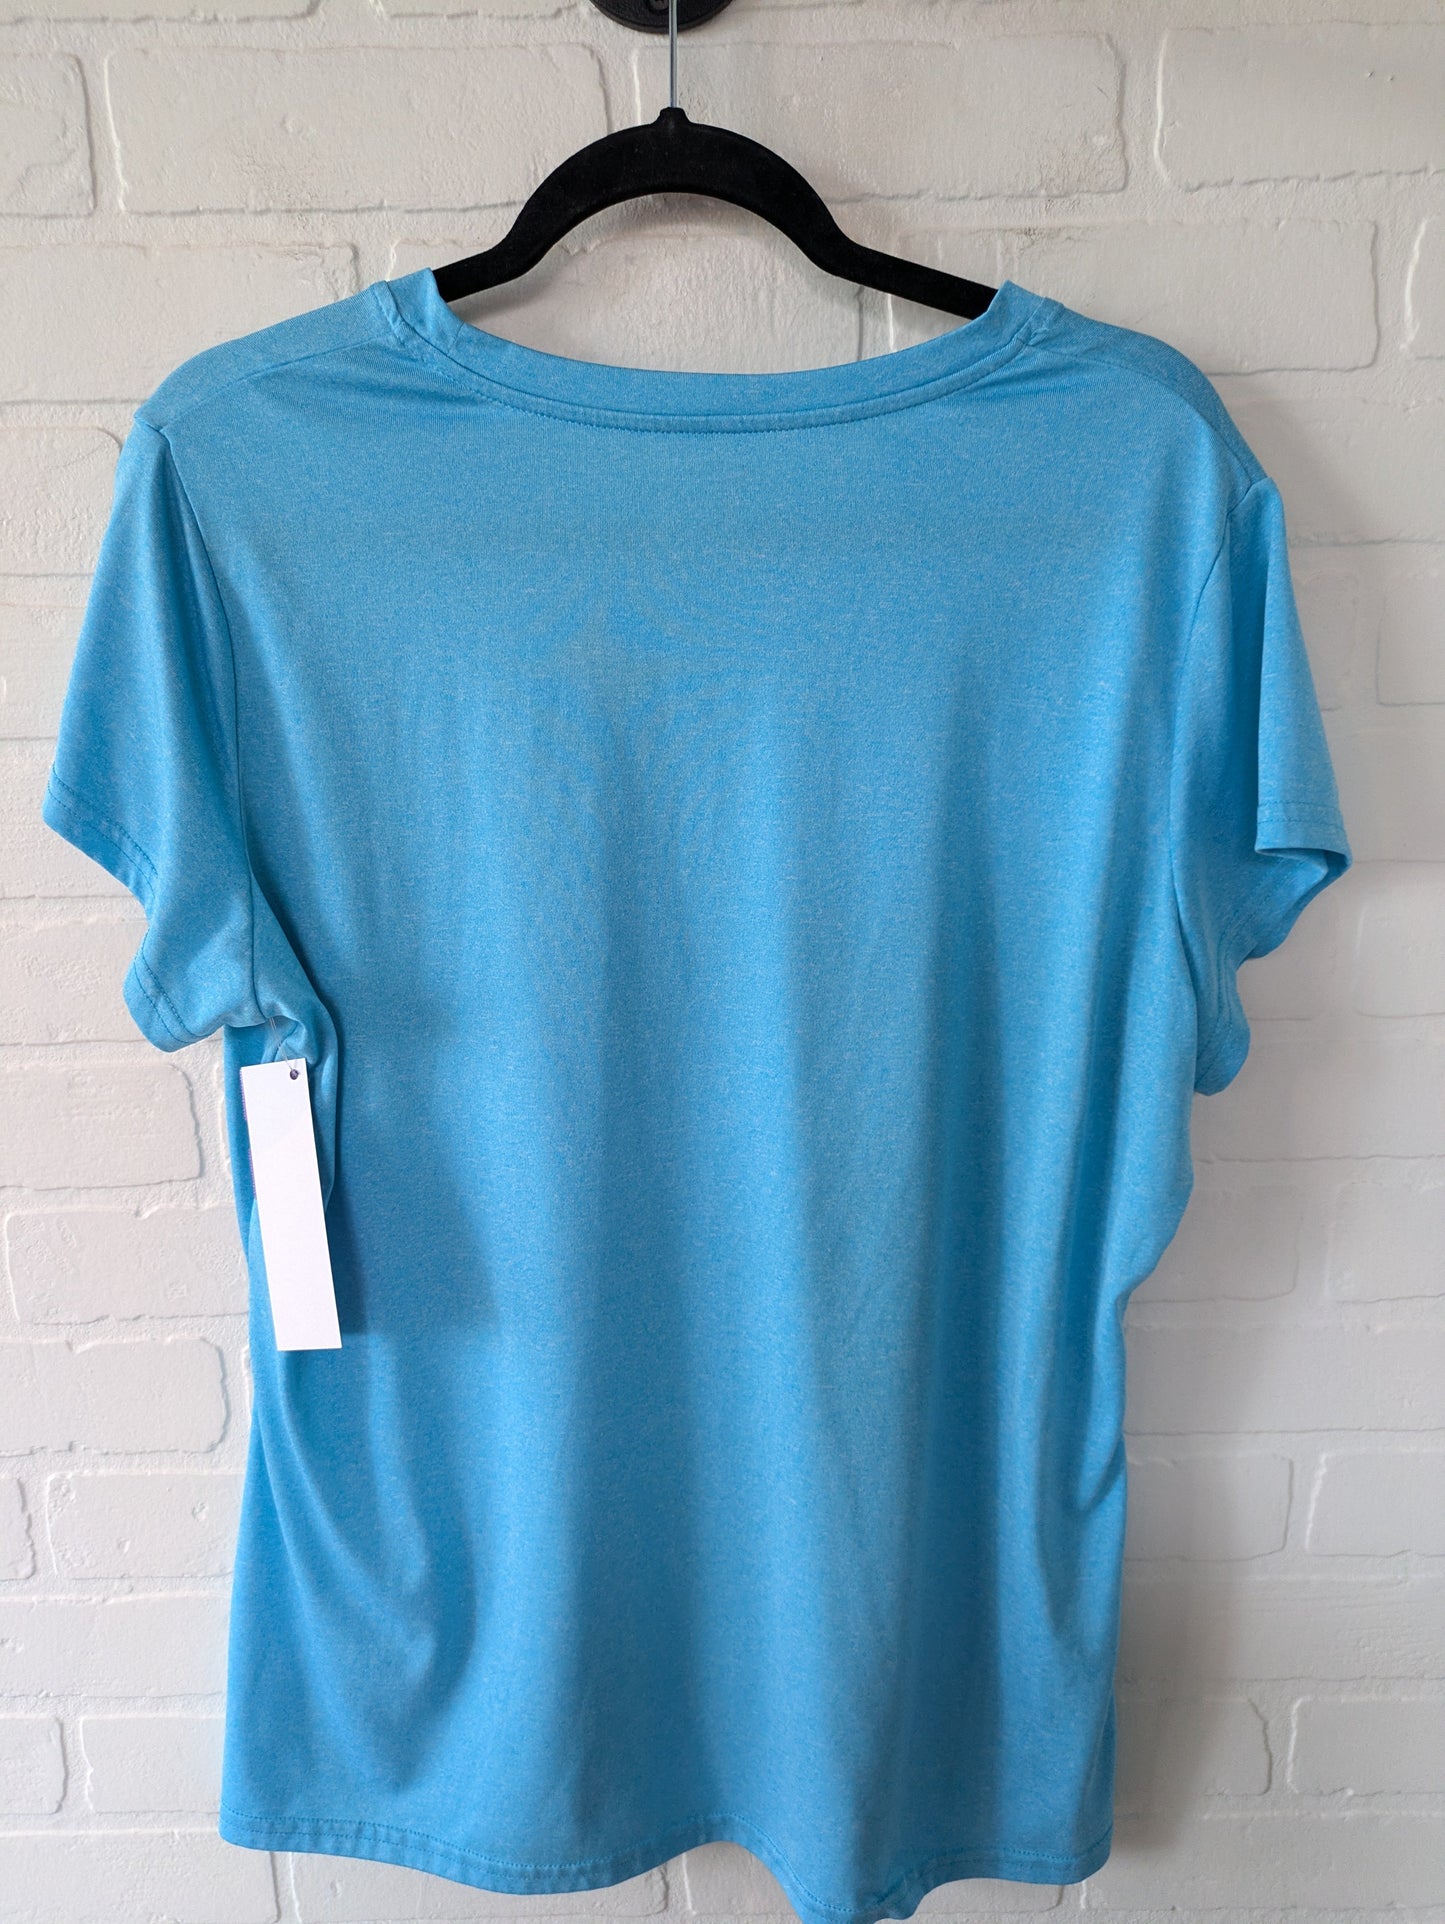 Blue Athletic Top Short Sleeve C9 By Champion, Size 1x